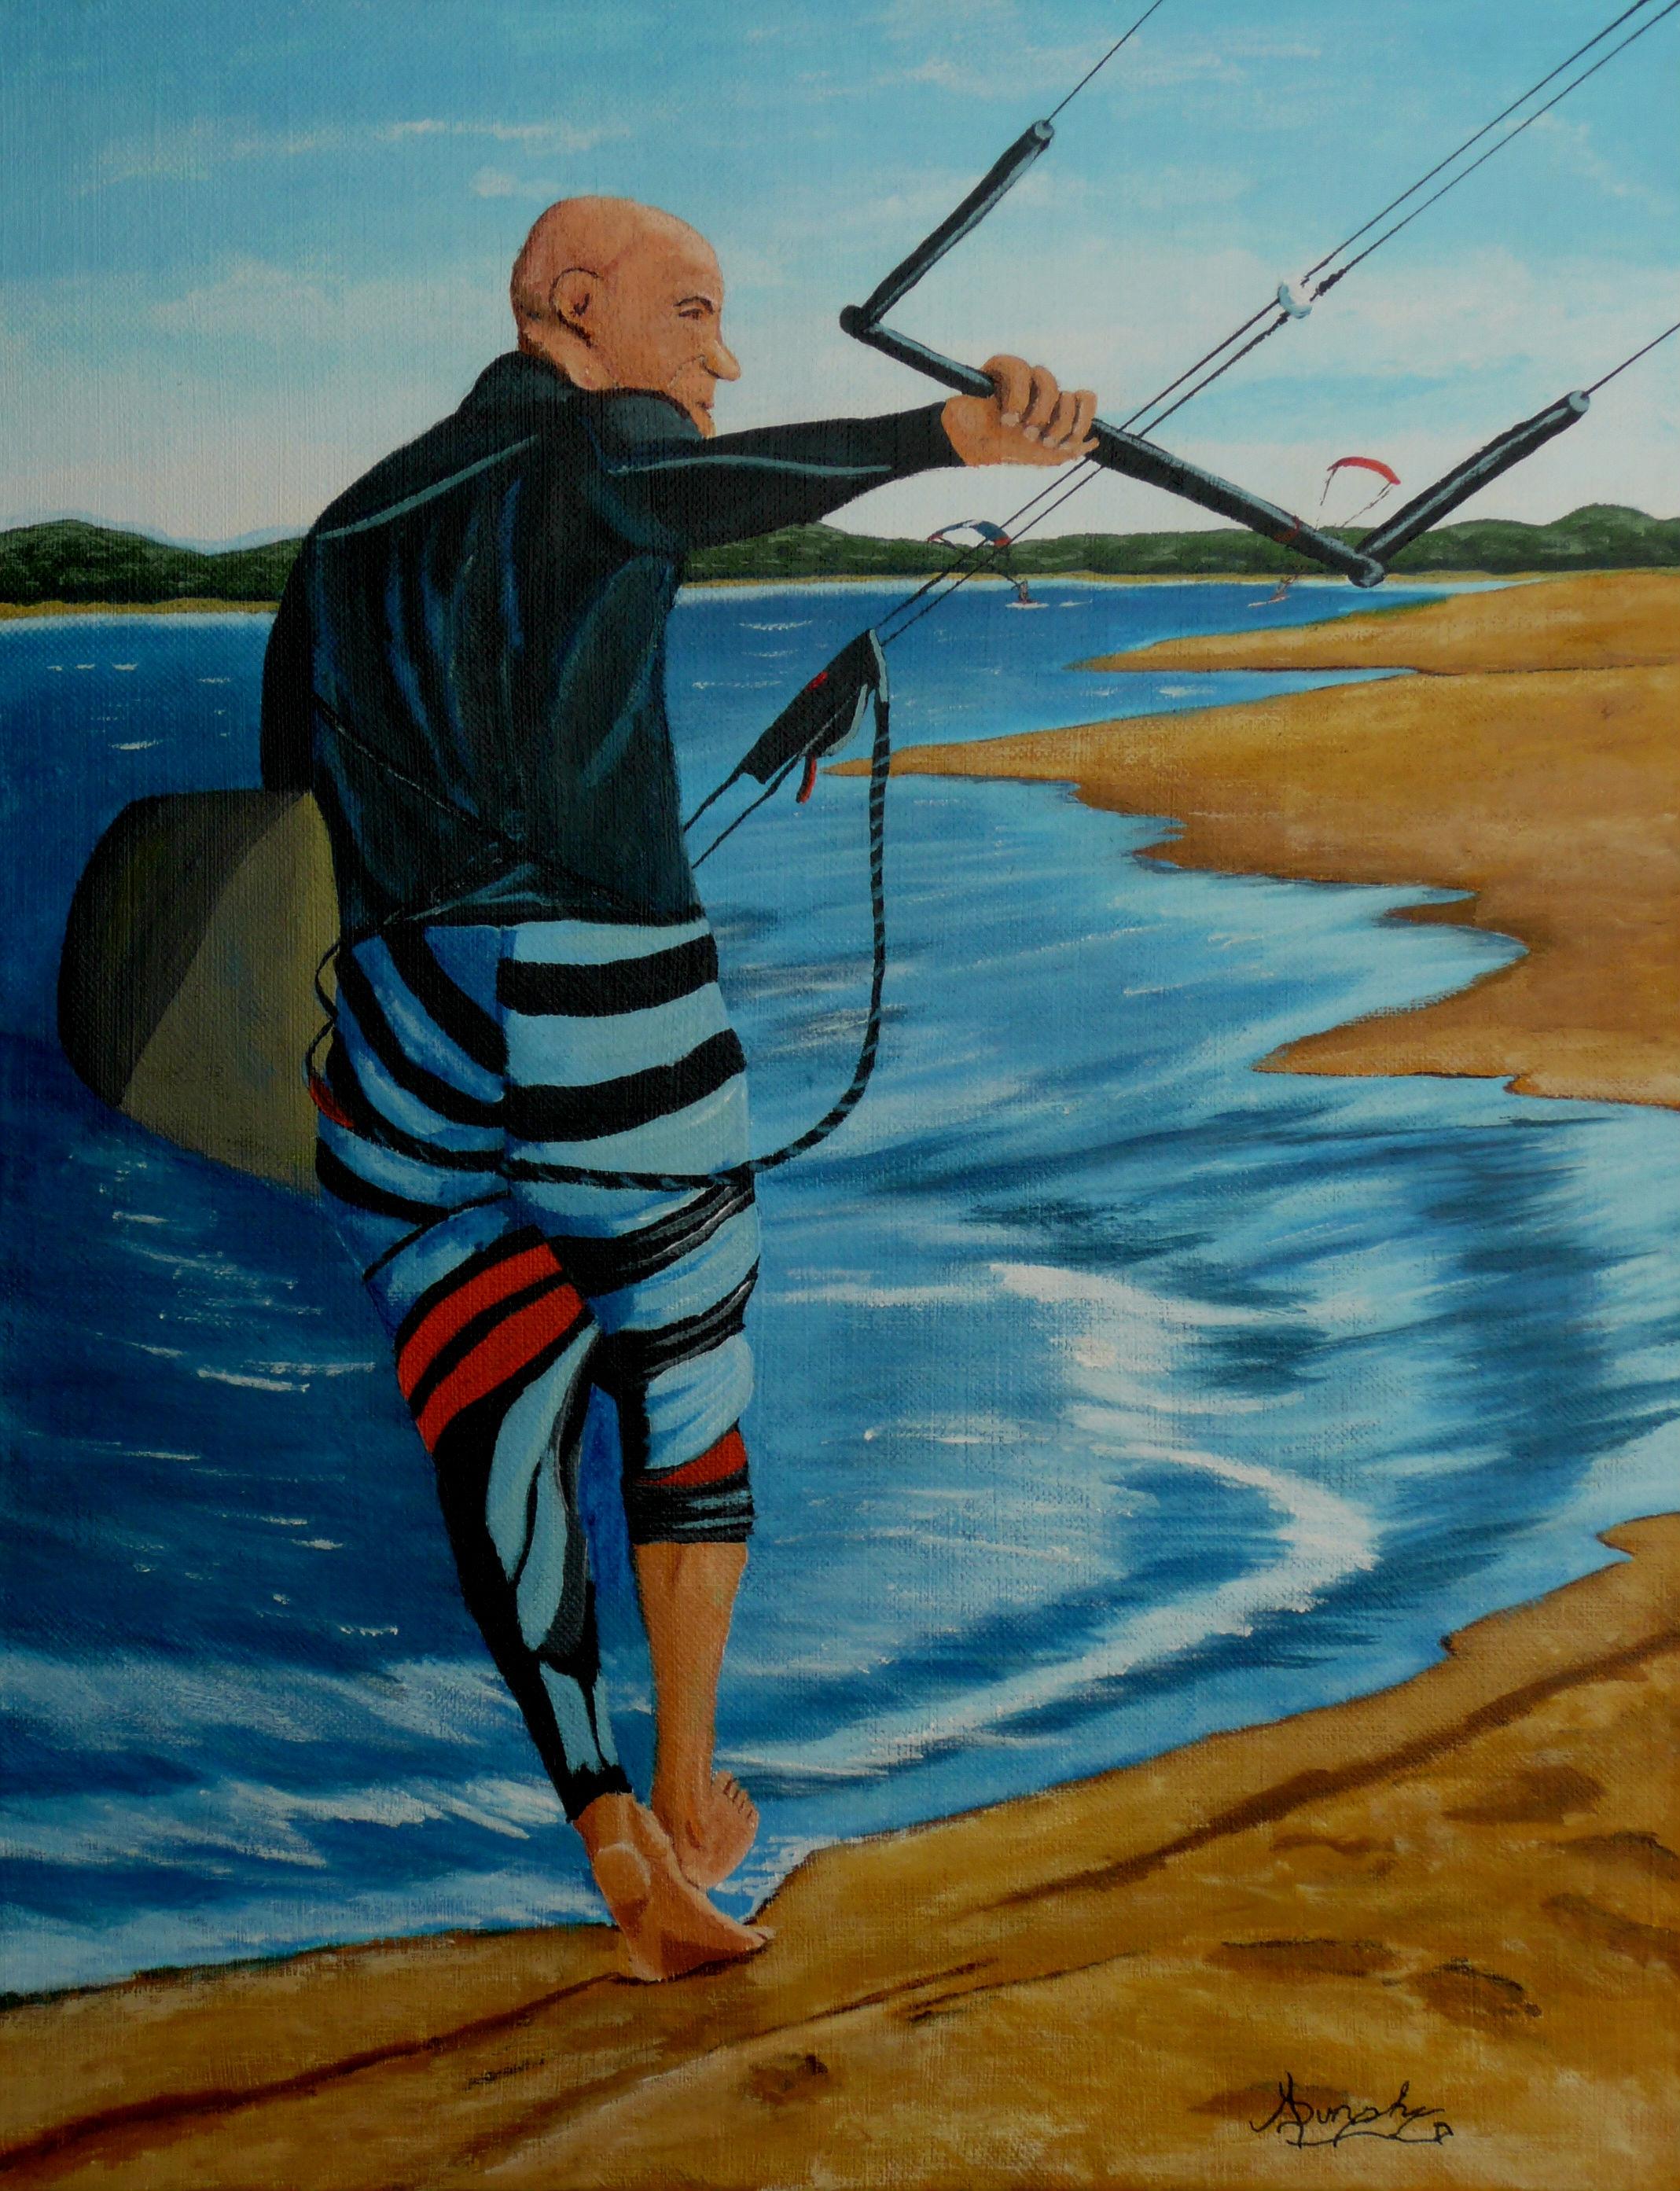 Looking to fill your space with excitement?  In this painting you can walk along with a kite surfer on the beach after a great ride of harnessing the wind to the board under his feet. :: Painting :: Contemporary :: This piece comes with an official